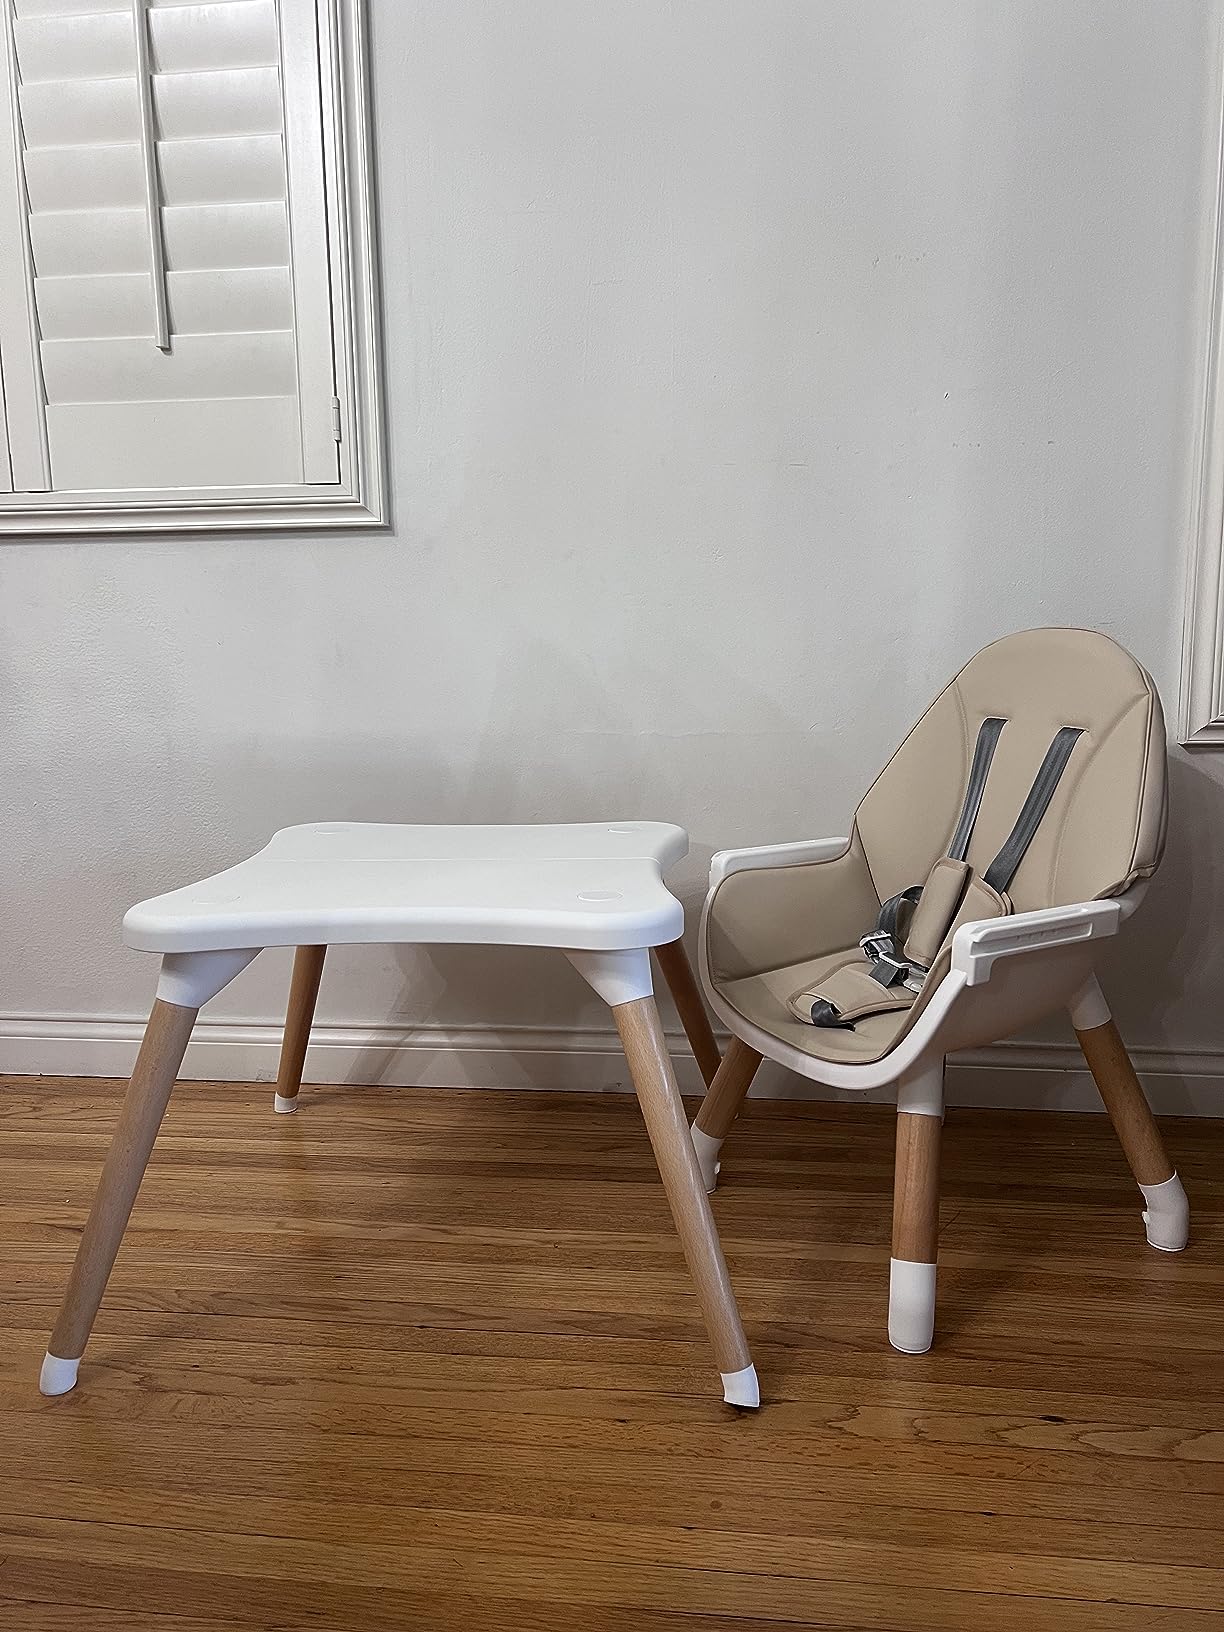 Great High Chair for price